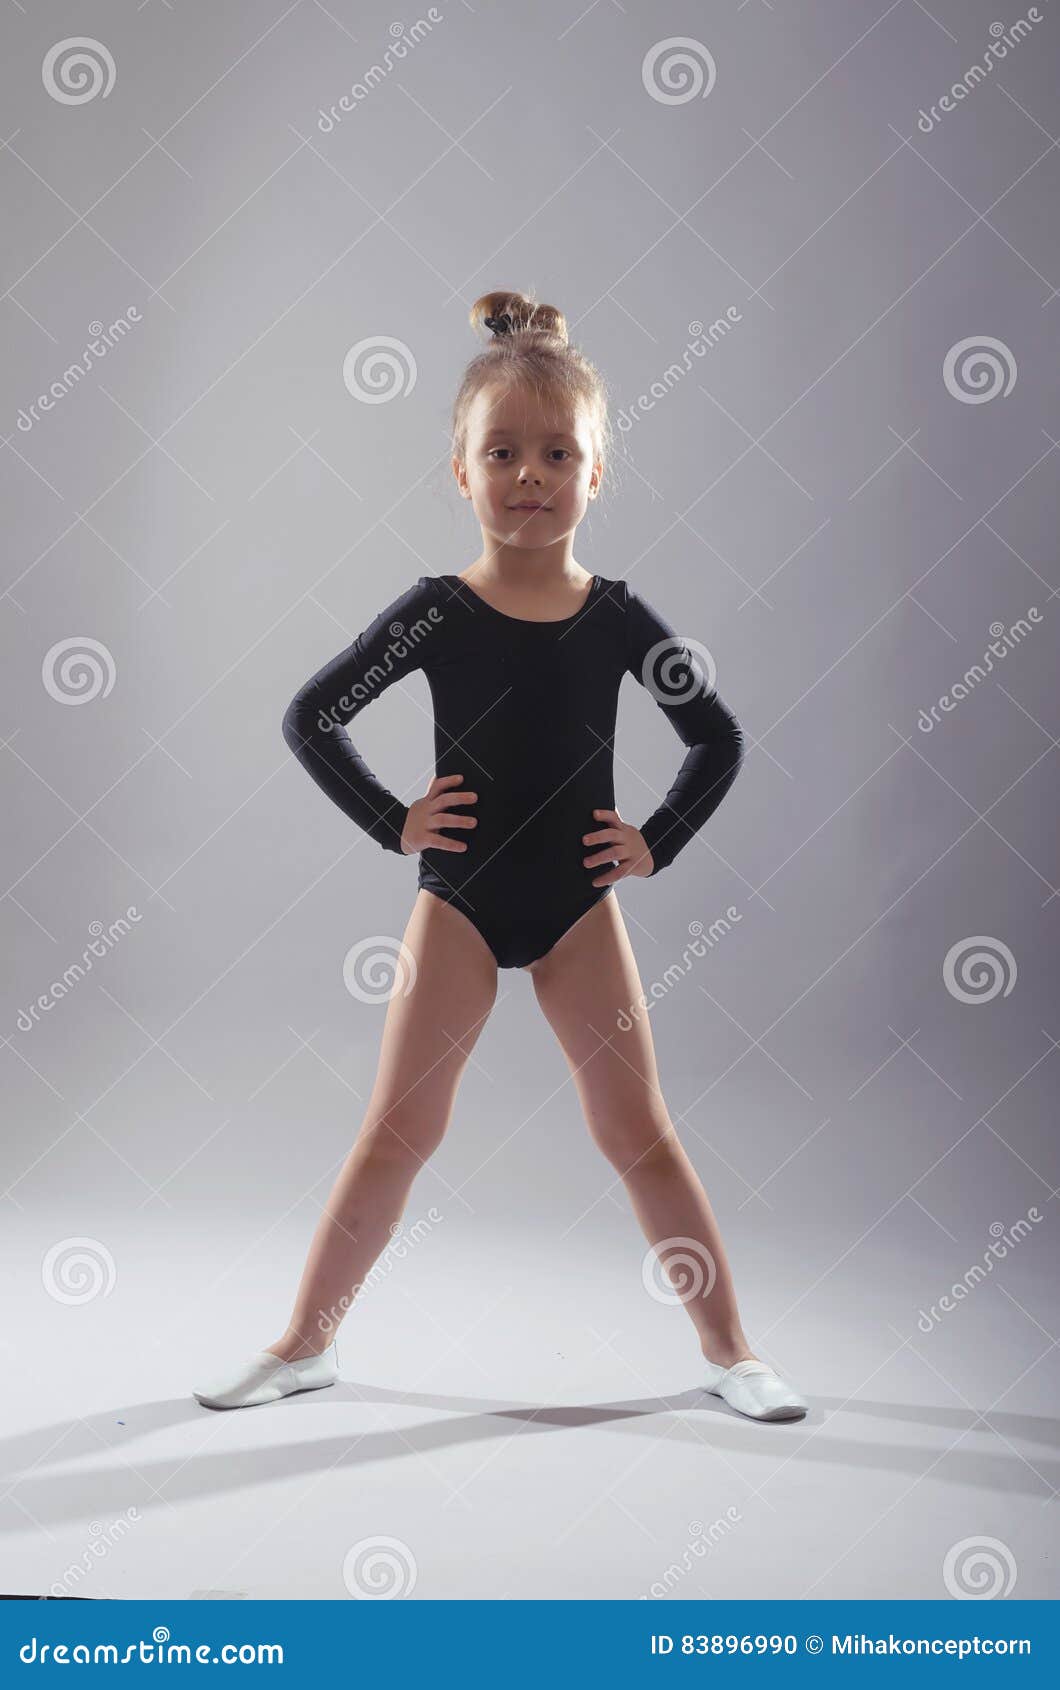 https://thumbs.dreamstime.com/z/little-girl-black-tights-dancing-gray-background-beautiful-bathing-suit-full-growth-83896990.jpg